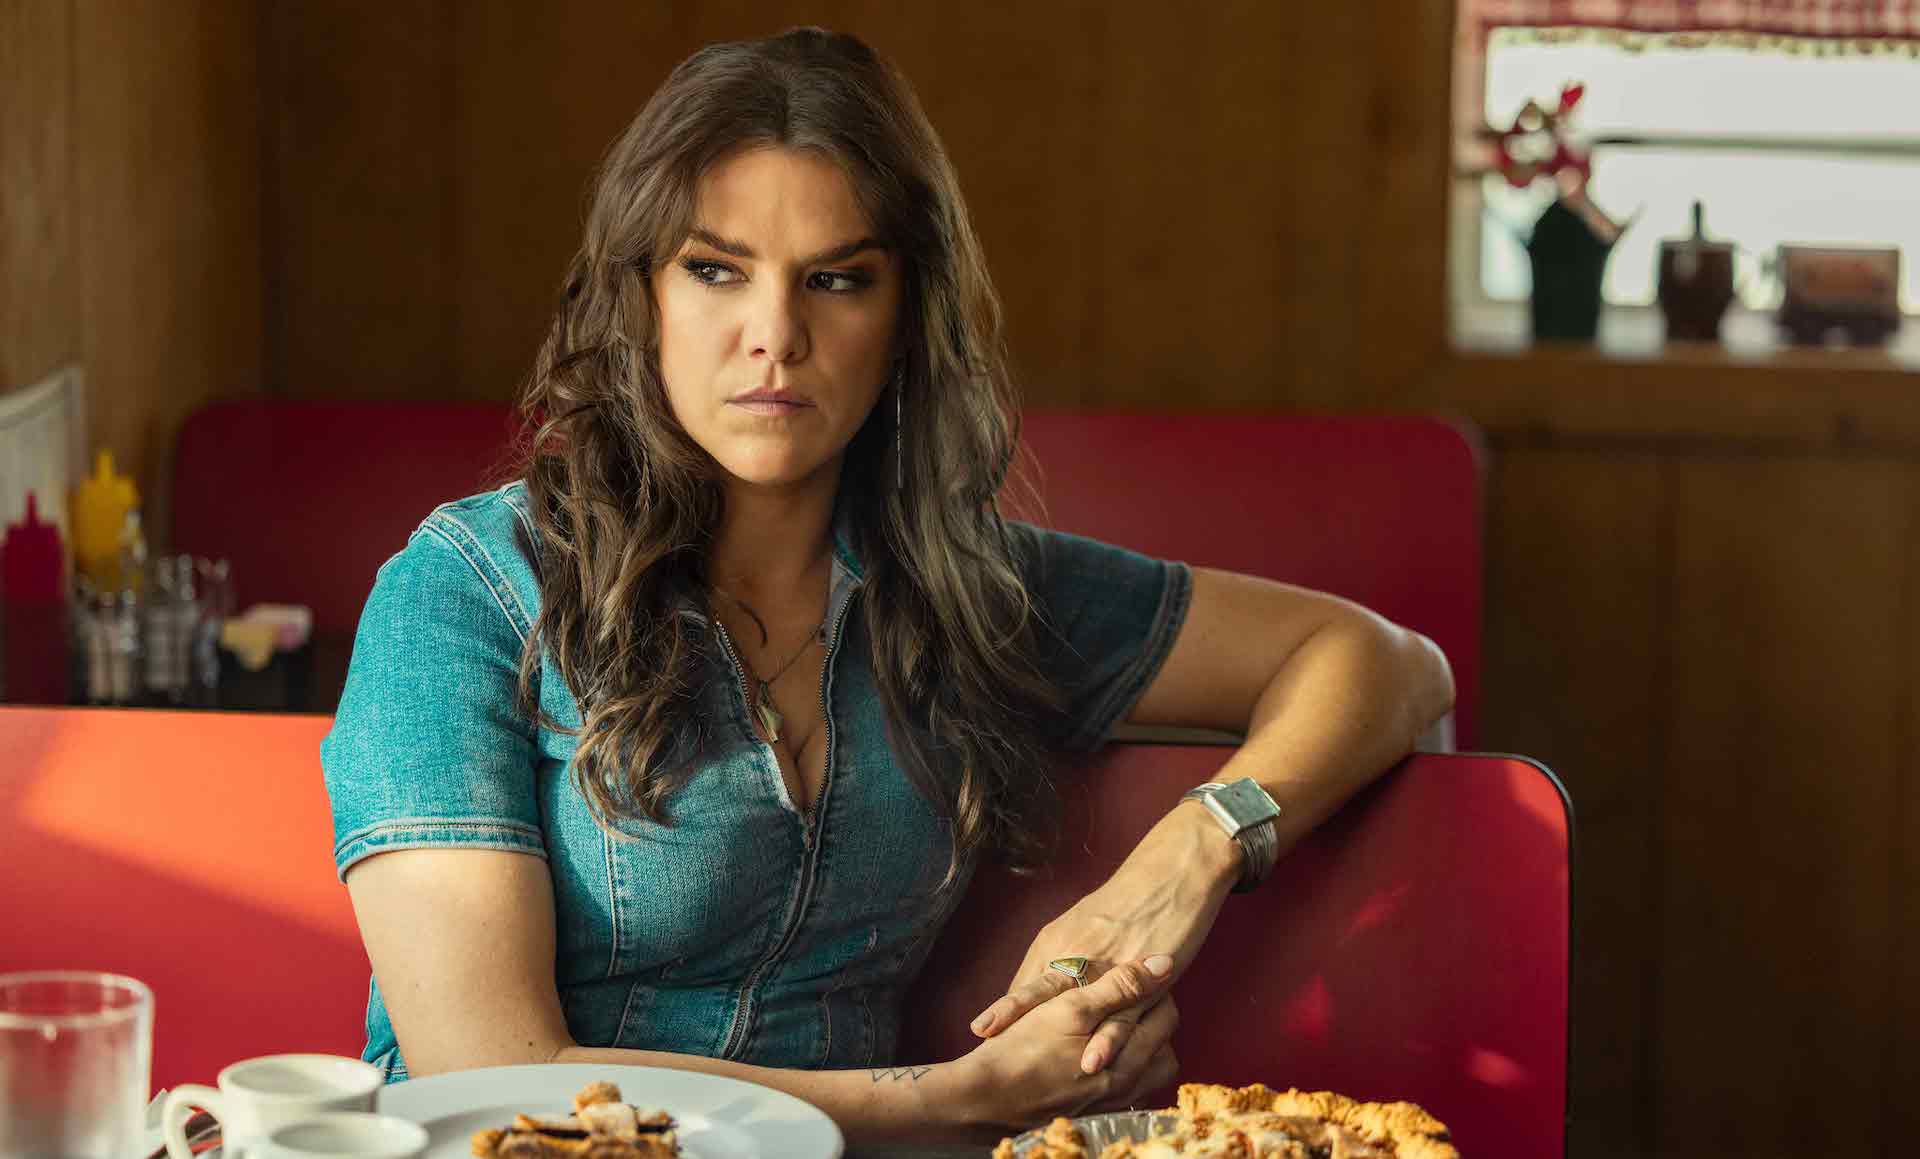 A woman with long, wavy brown hair wearing a denim zip-up top and sitting in a red diner booth in front of a whole pie; still from "Reservation Dogs"